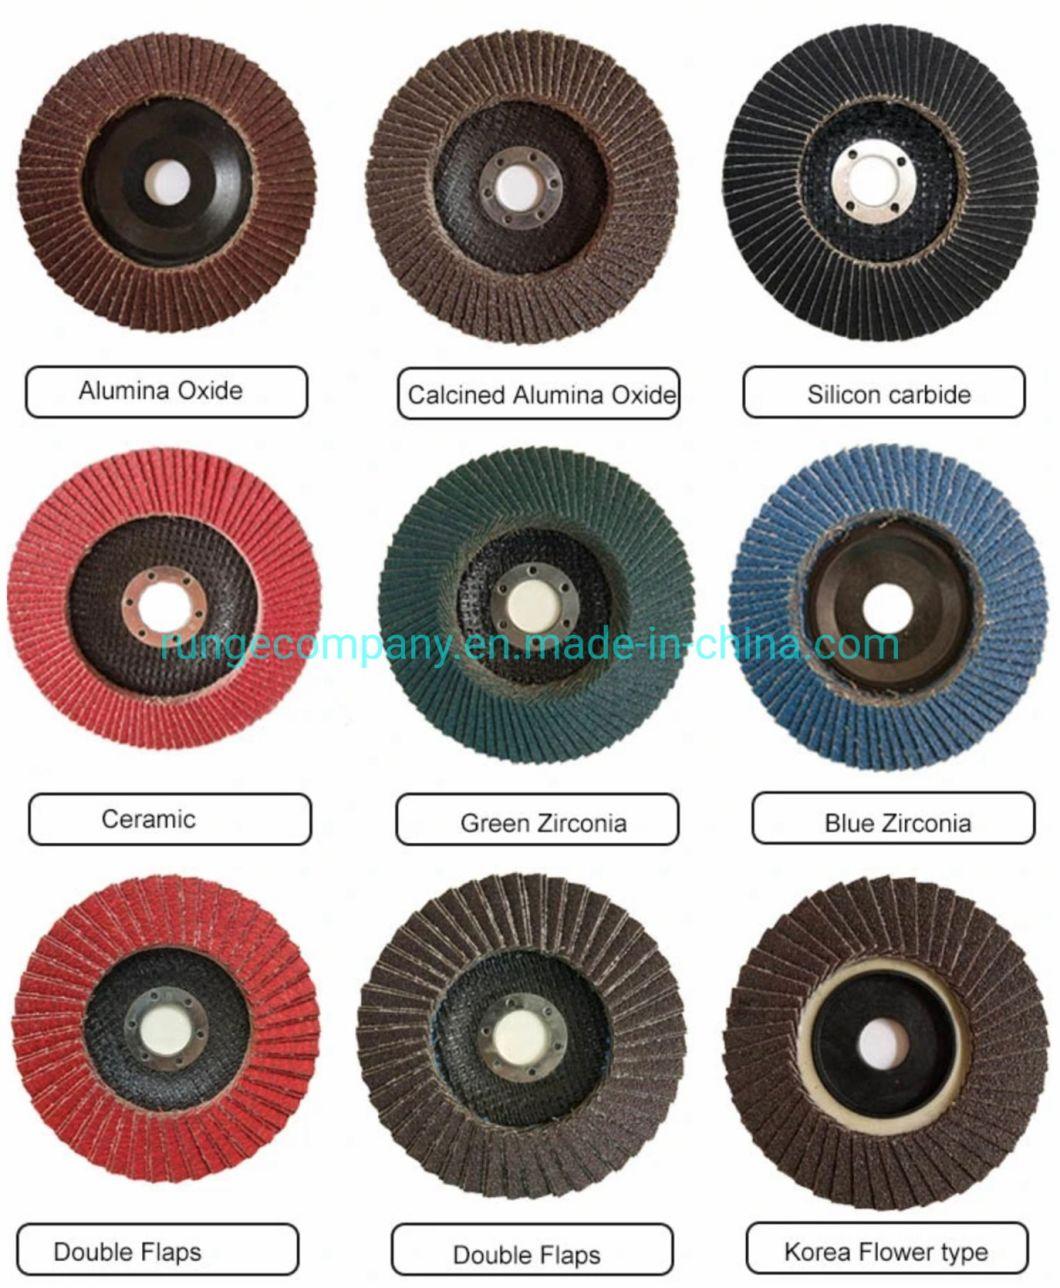 Premium Power Electric Tools Accessories Abrasive Cut off Cutting Wheels 14" for Metal and Stainless Steel